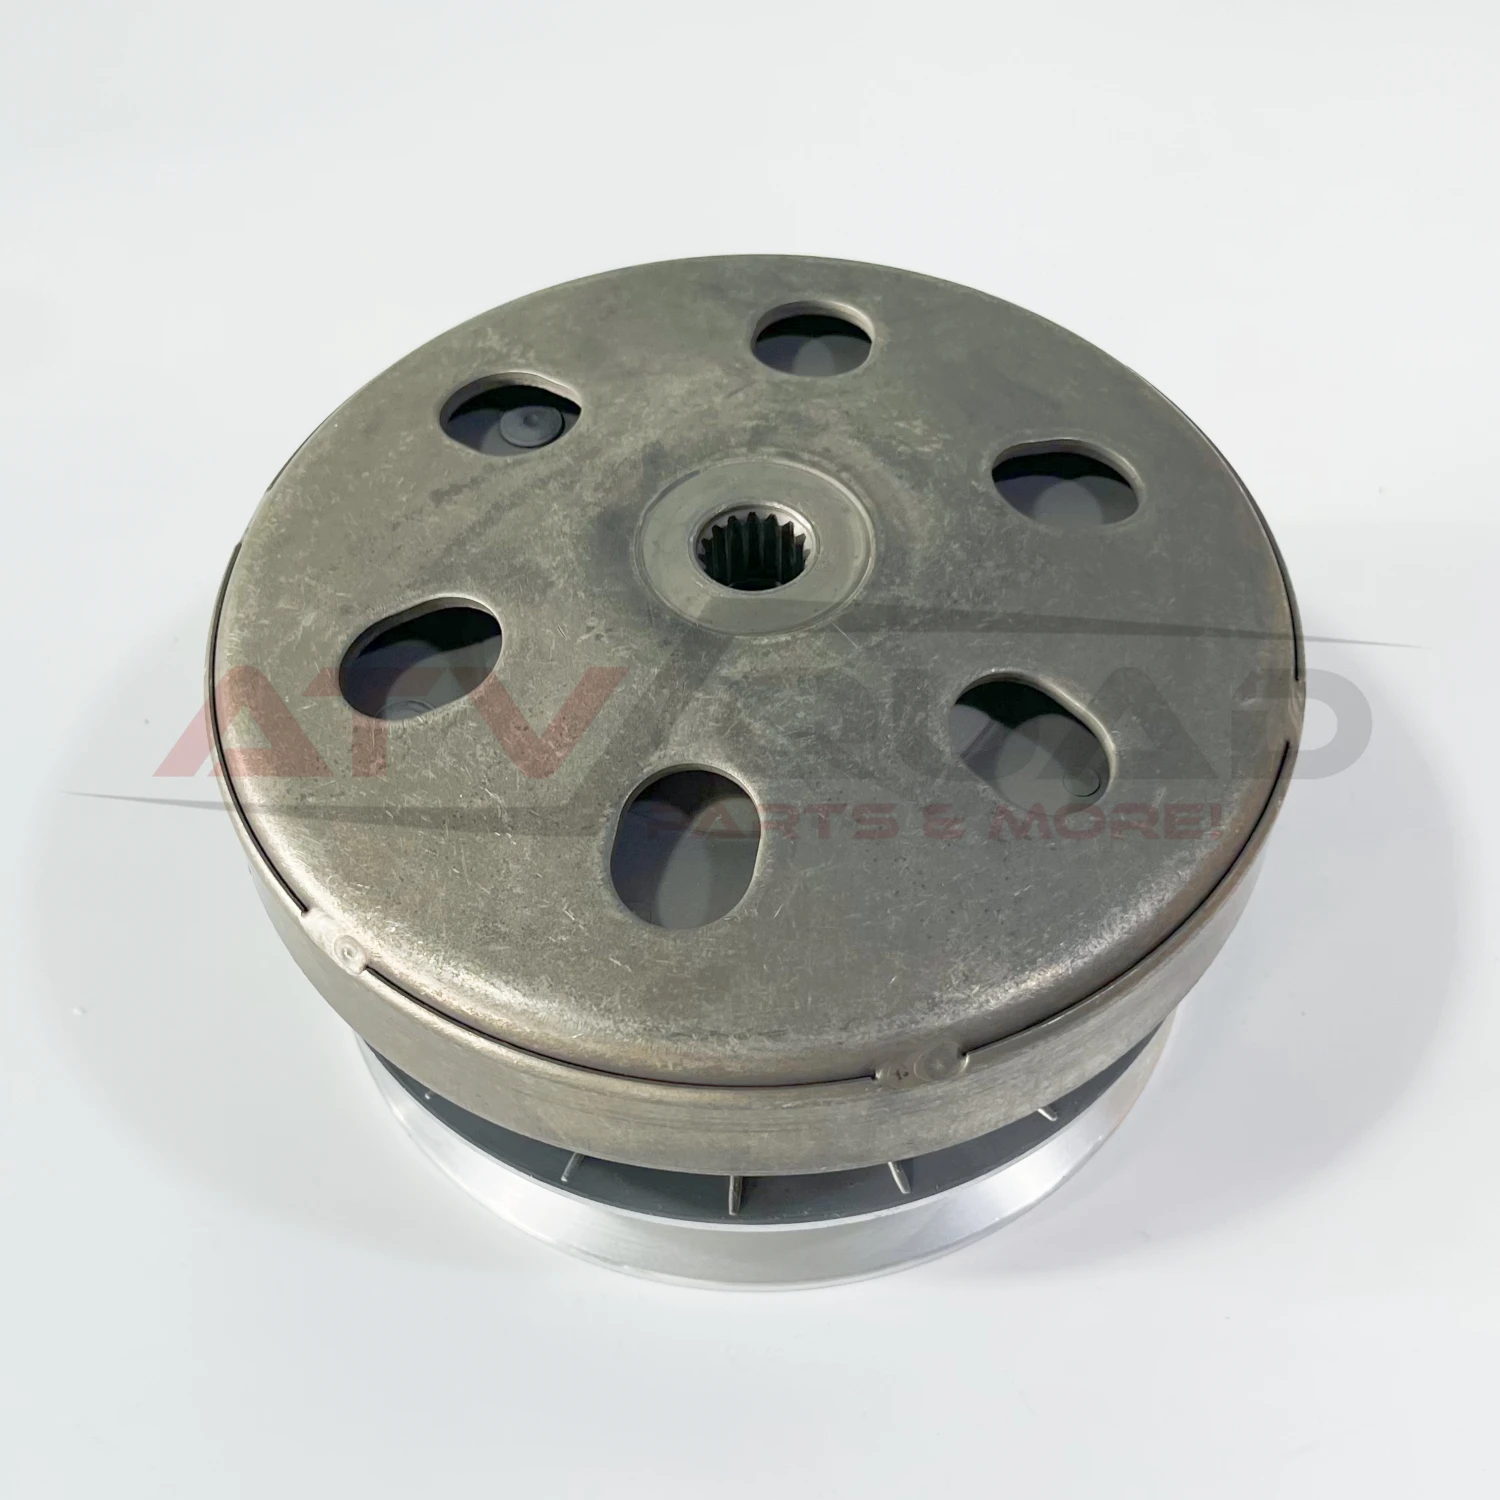 

Secondary Clutch Complete Driven Assy for Linhai 400 E2 400 2B IRS Dragon Fly Bighorn 400 Carry 400 Scooter Mainstreet 400 27248